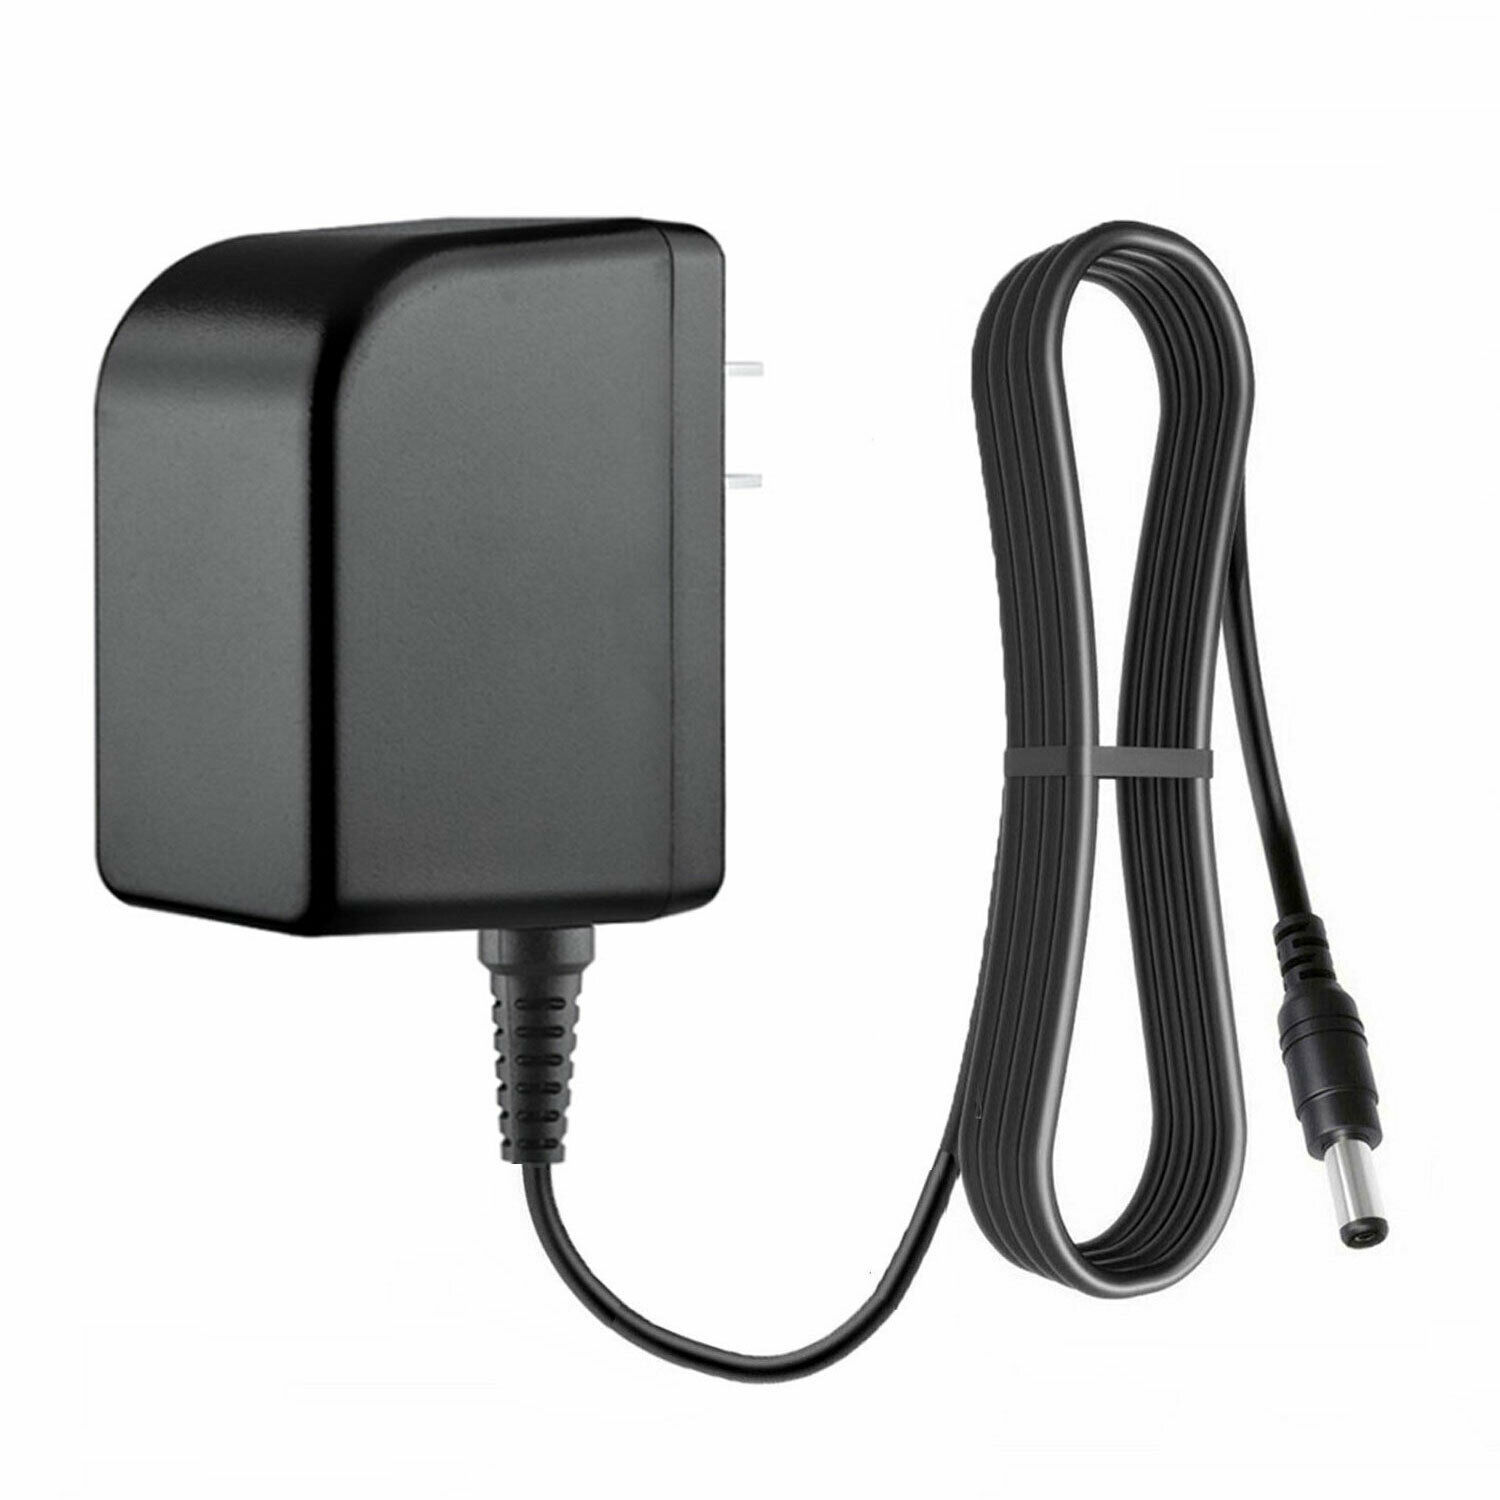 5V AC power adapter spare 10W power supply for Creative Zen Vision W player Featu